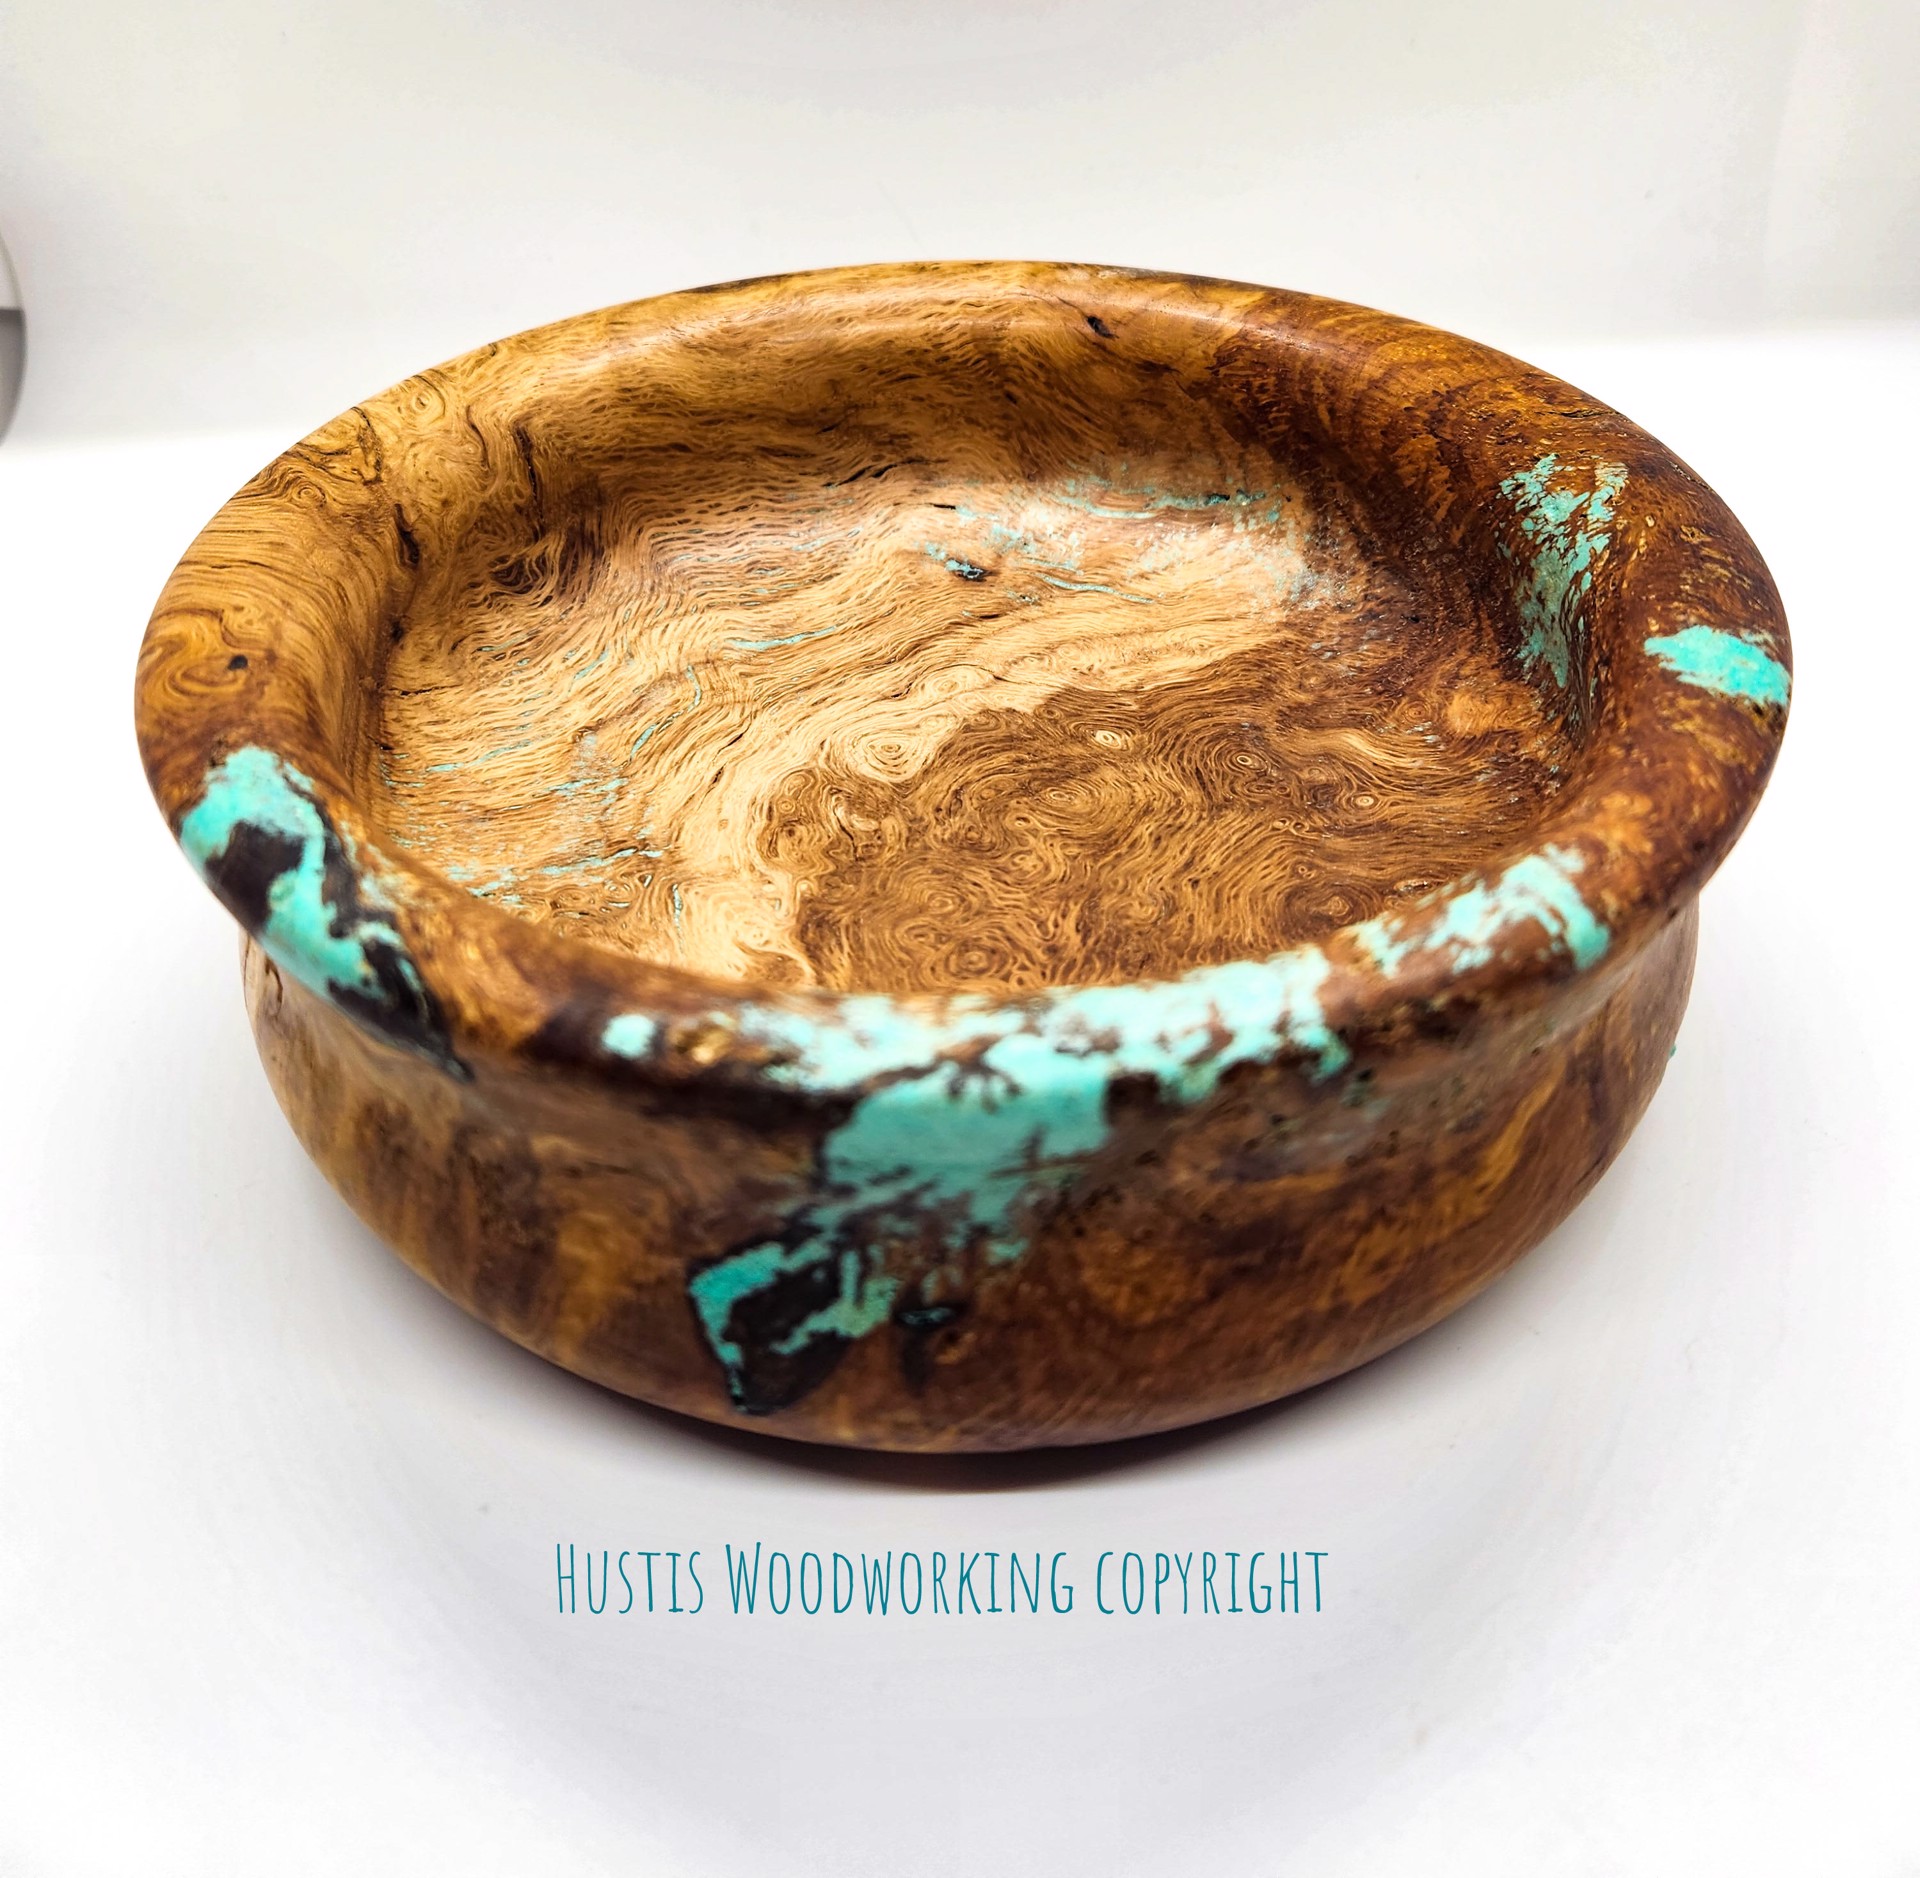 Oak Burl Bowl with Turquoise by Mark Hustis